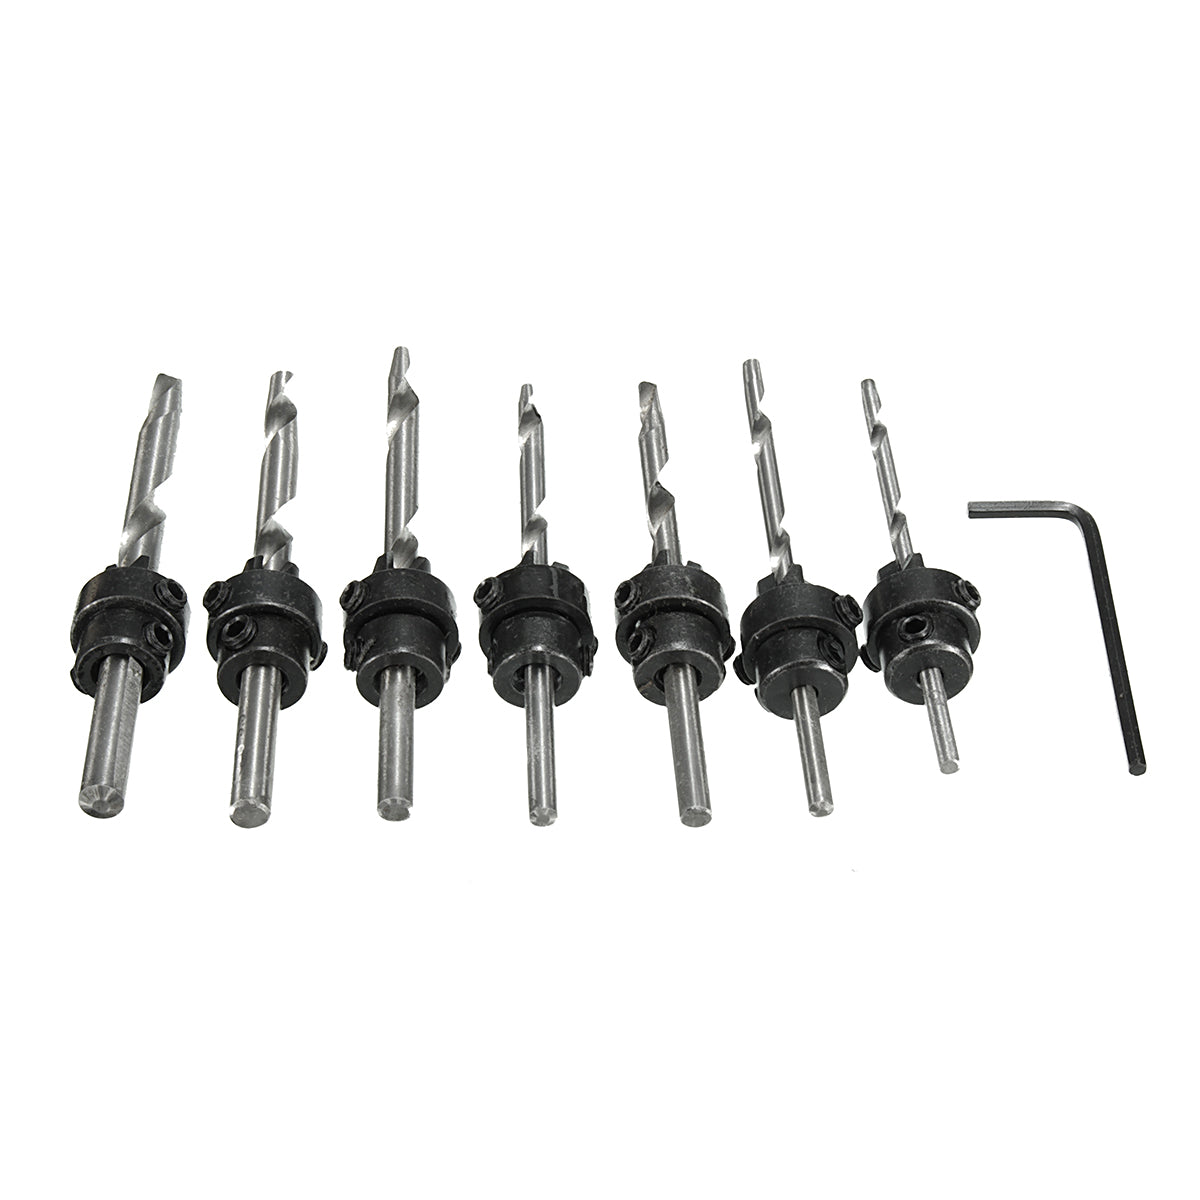 7pcs Countersink Drill Bit Set Tapered Stop Collar Wood Hole Screw Kit for Woodworking